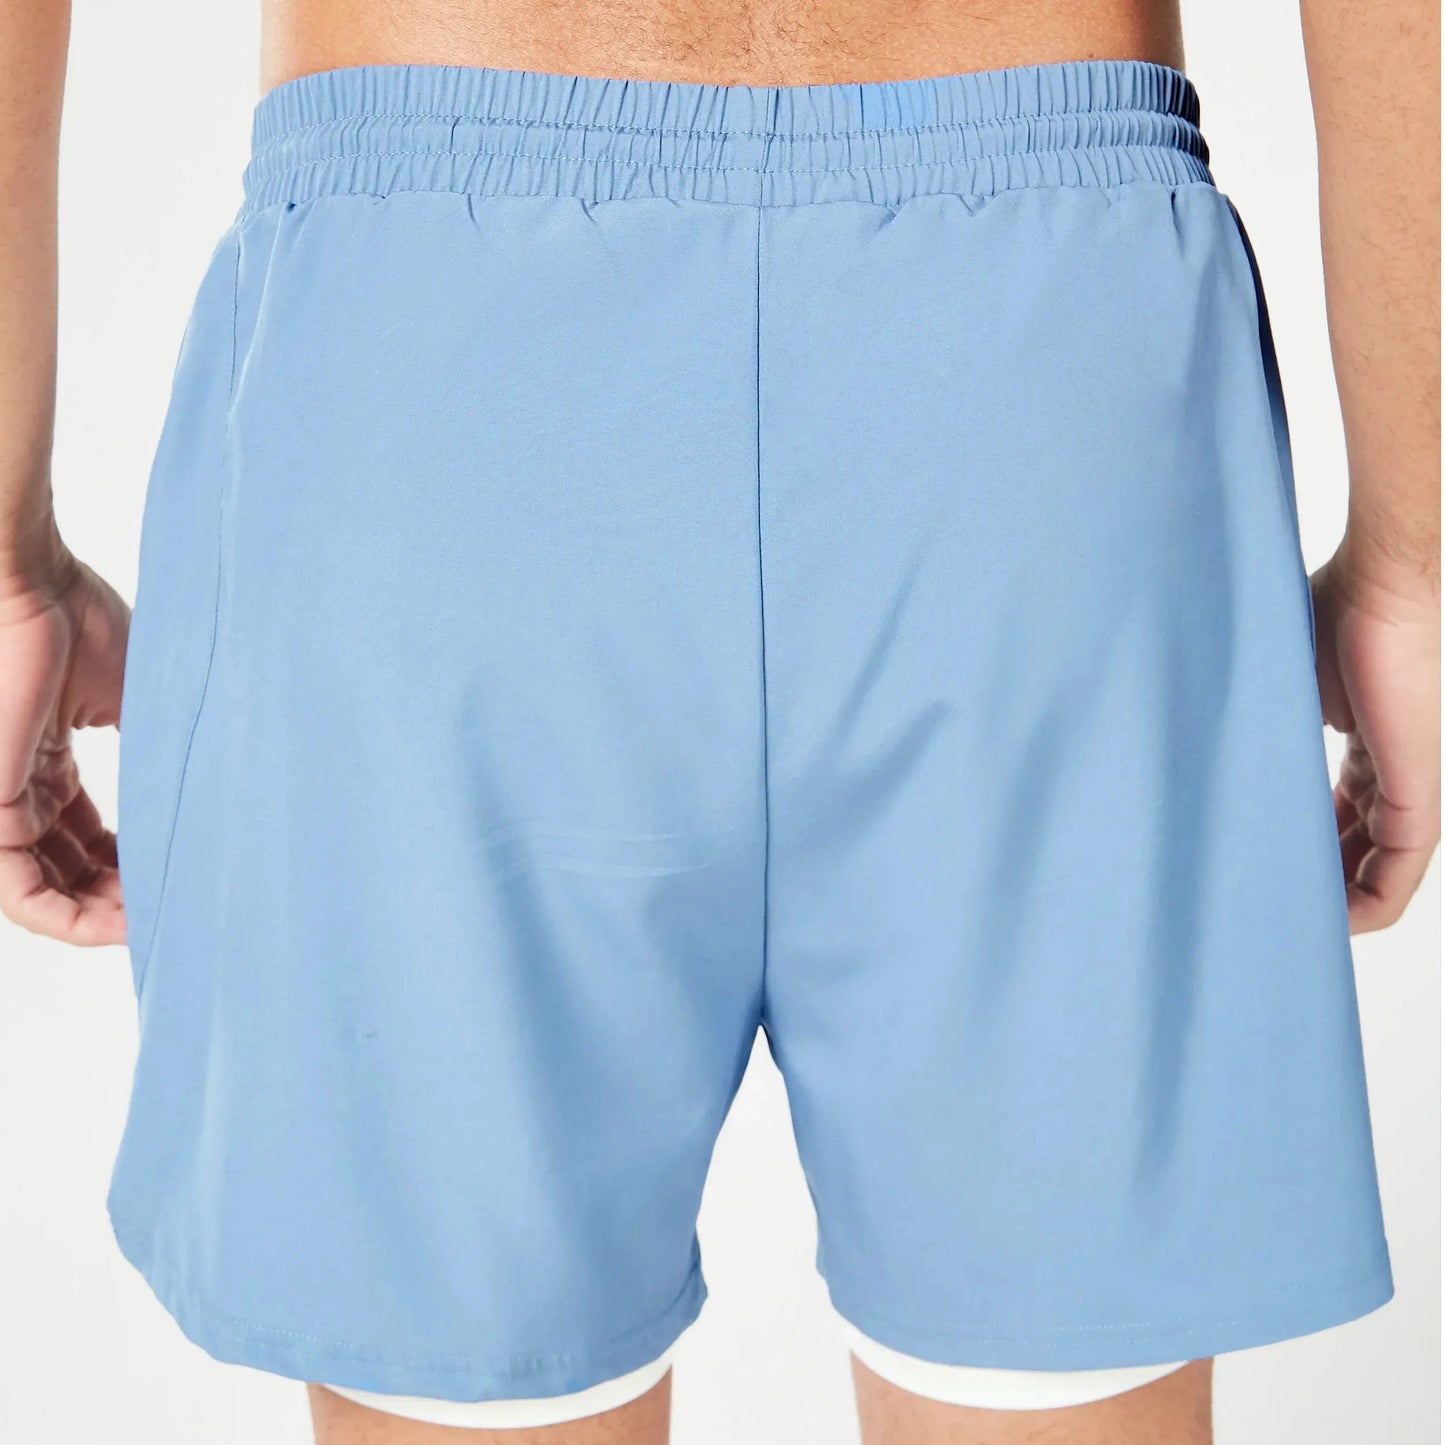 Essential 5" 2-in-1 Shorts - Coronet Blue